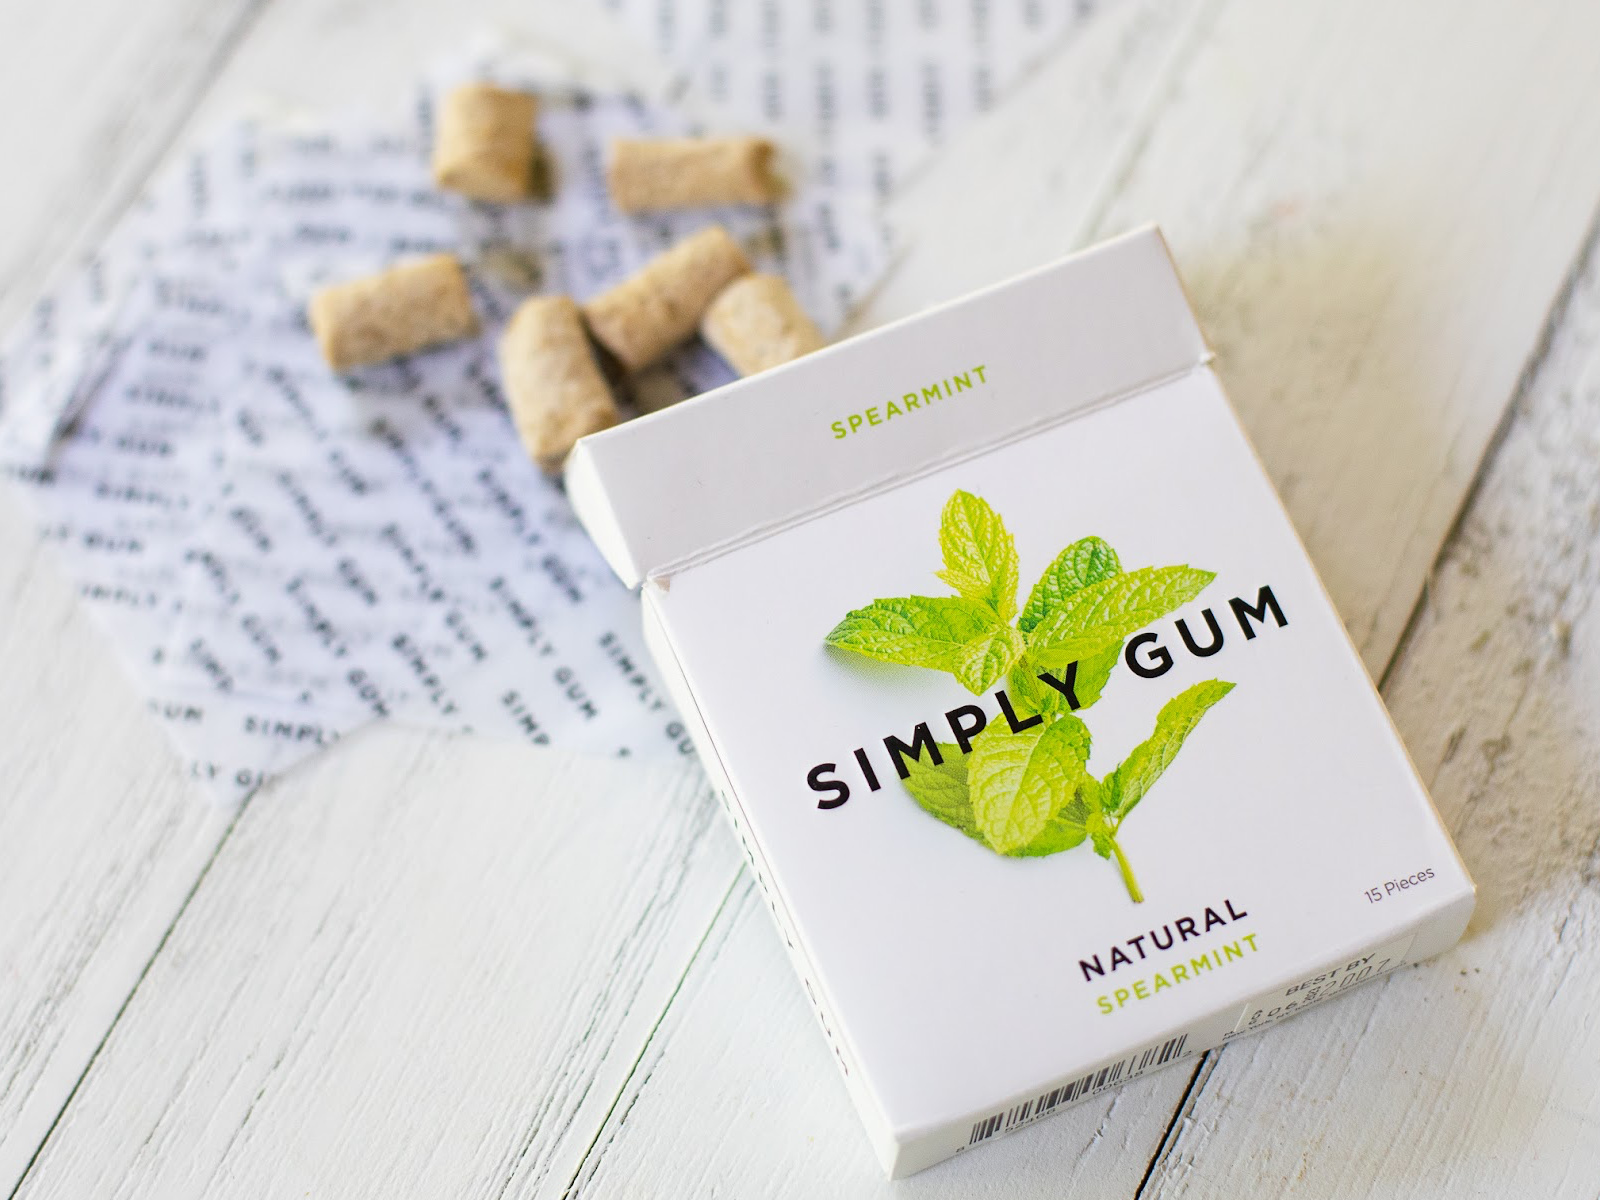 Get The Packs Of Simply Gum For Just $2 At Publix